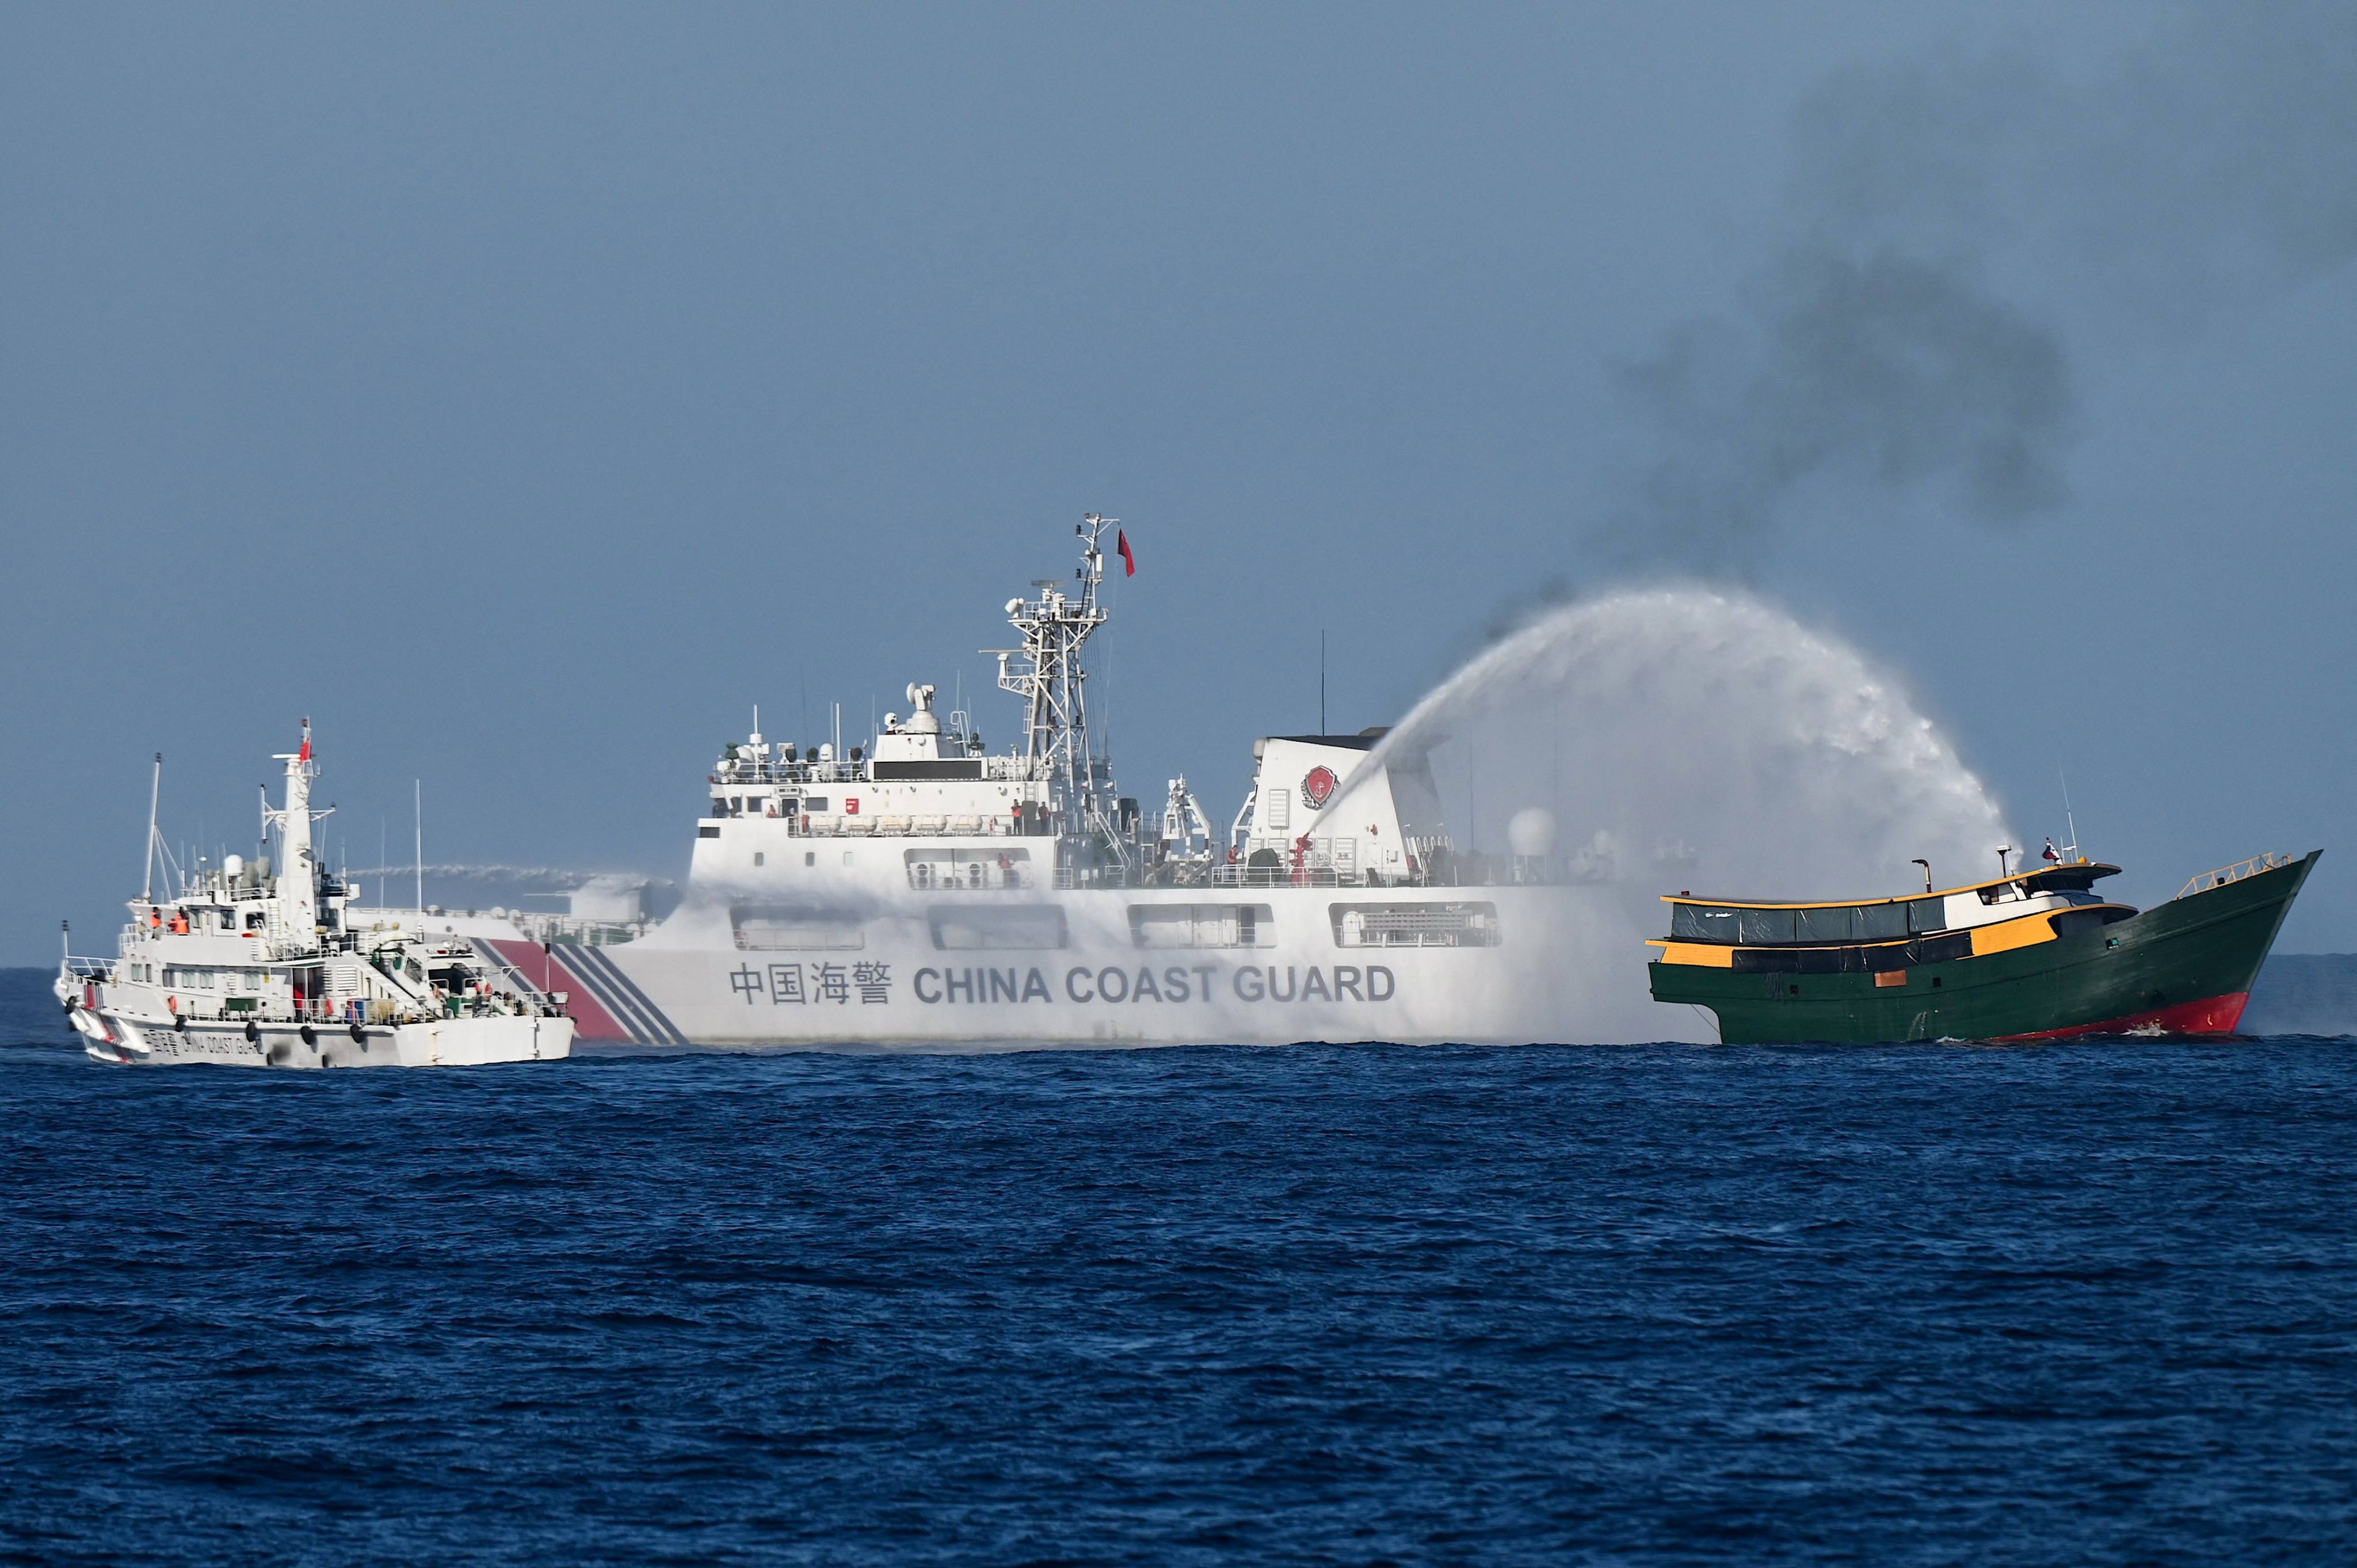 Chinese coastguards fire water cannons at a Philippine supply ship in a confrontation earlier this month near the Second Thomas Shoal. Photo: AFP